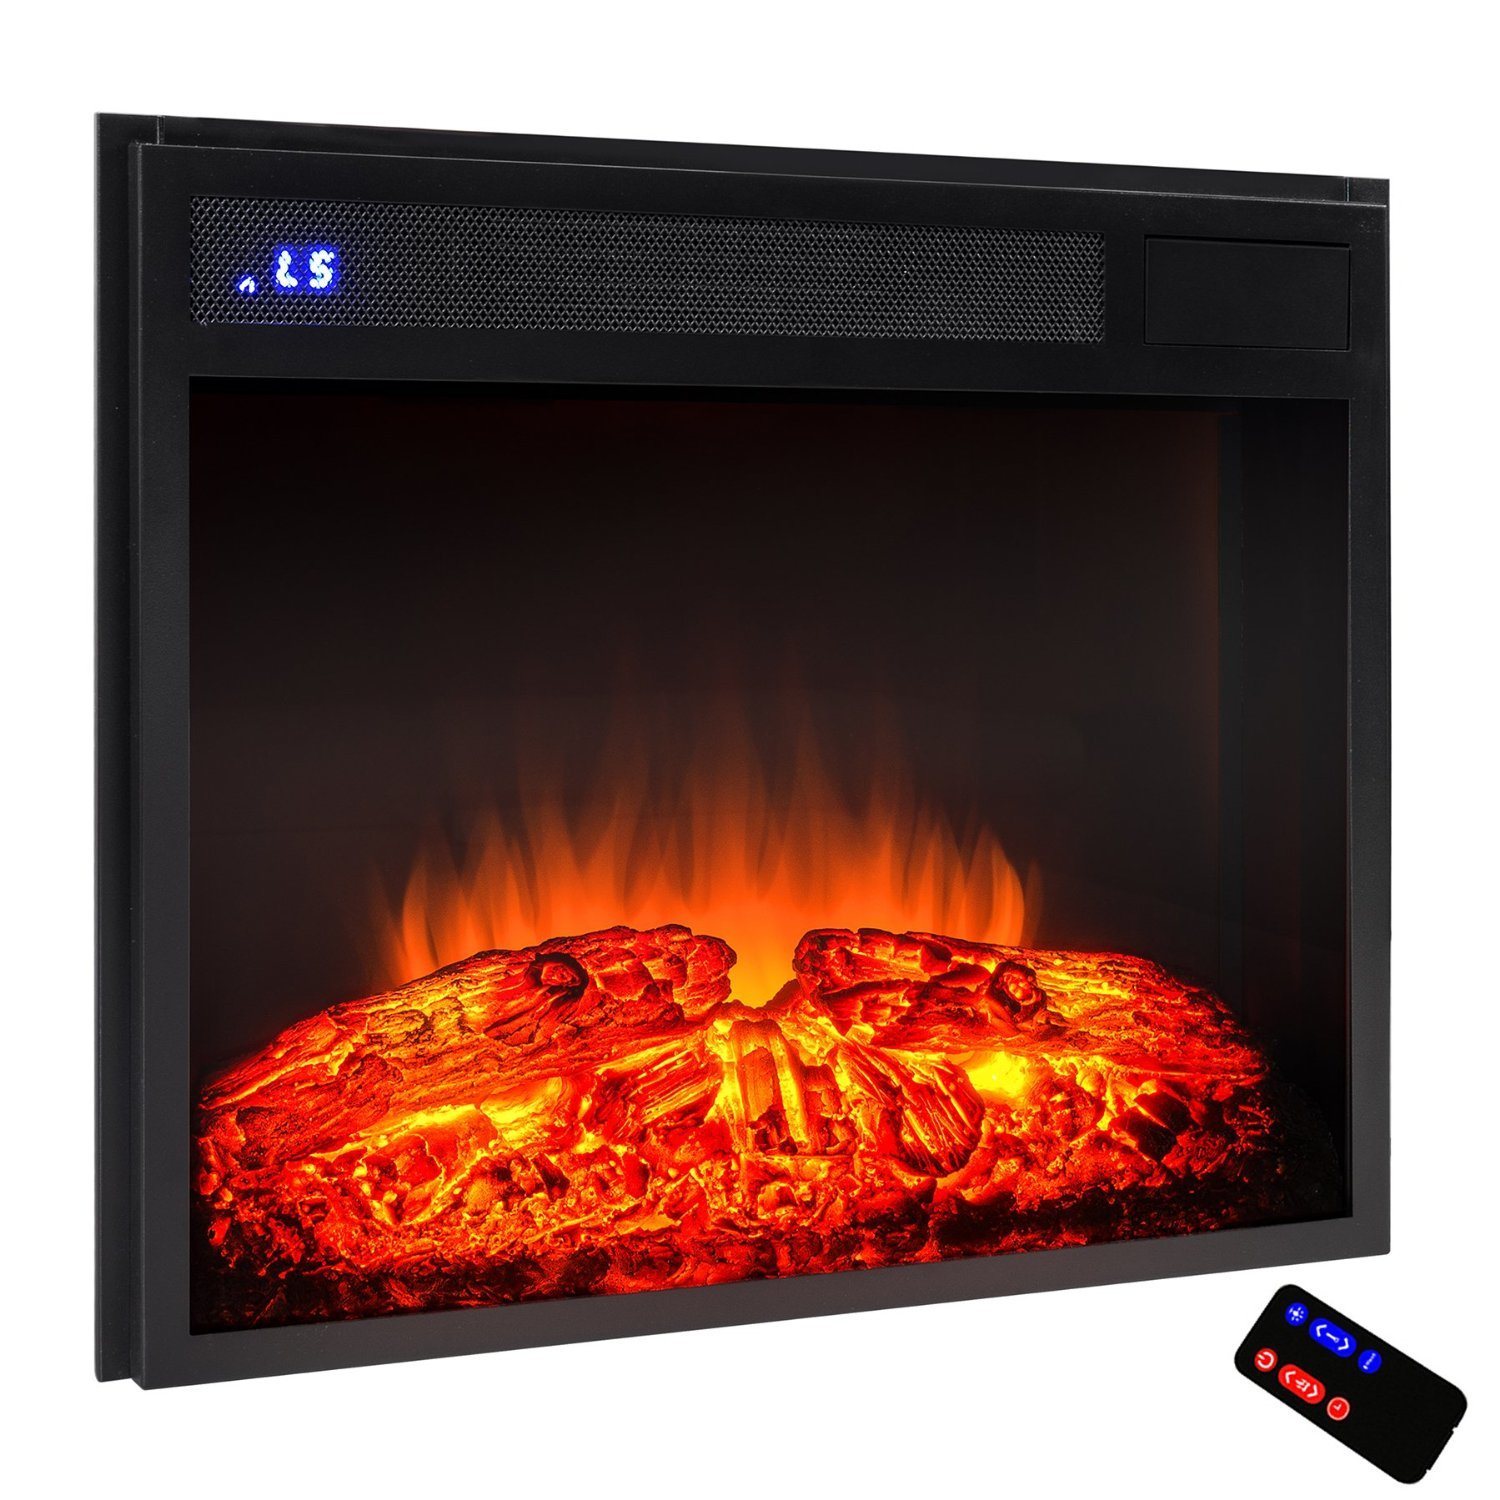 26 Electric Fireplace Insert Awesome Best Fireplace Inserts Reviews 2019 – Gas Wood Electric